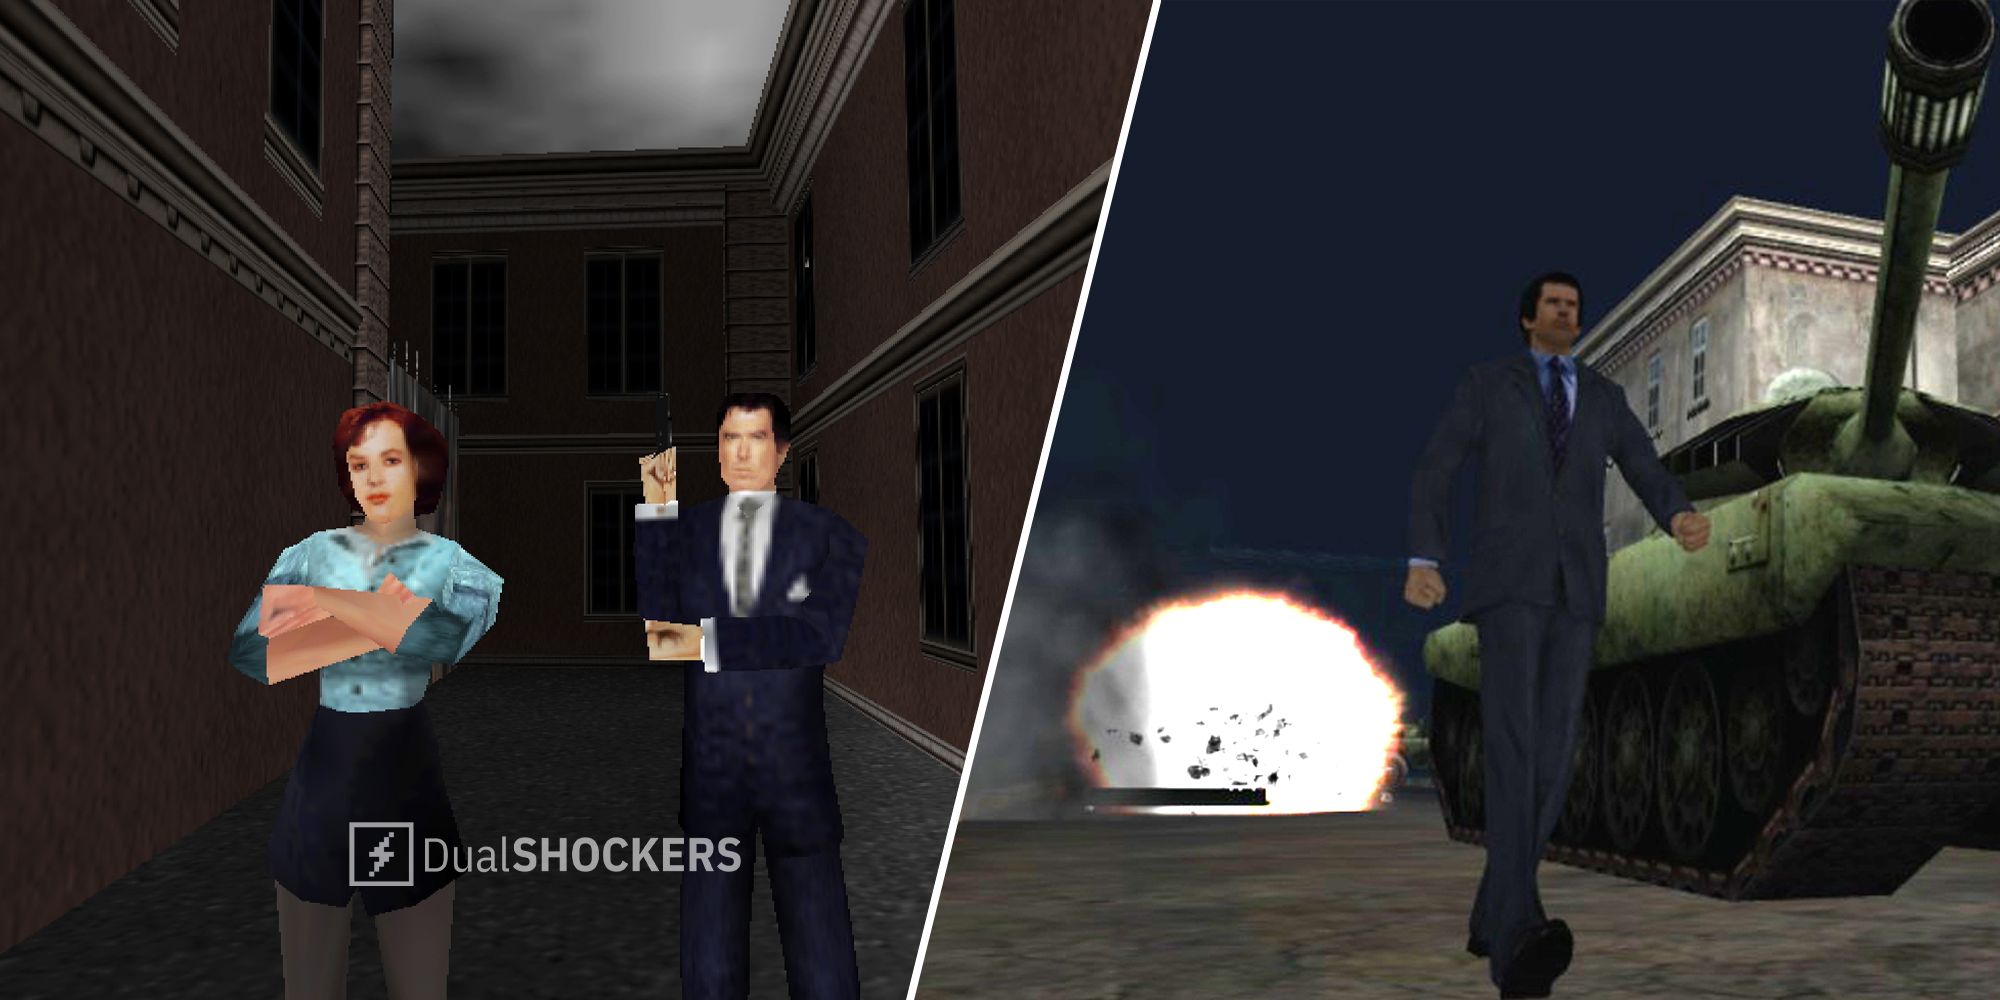 Goldeneye 007 Is Coming To Xbox Game Pass And Nintendo Switch Online